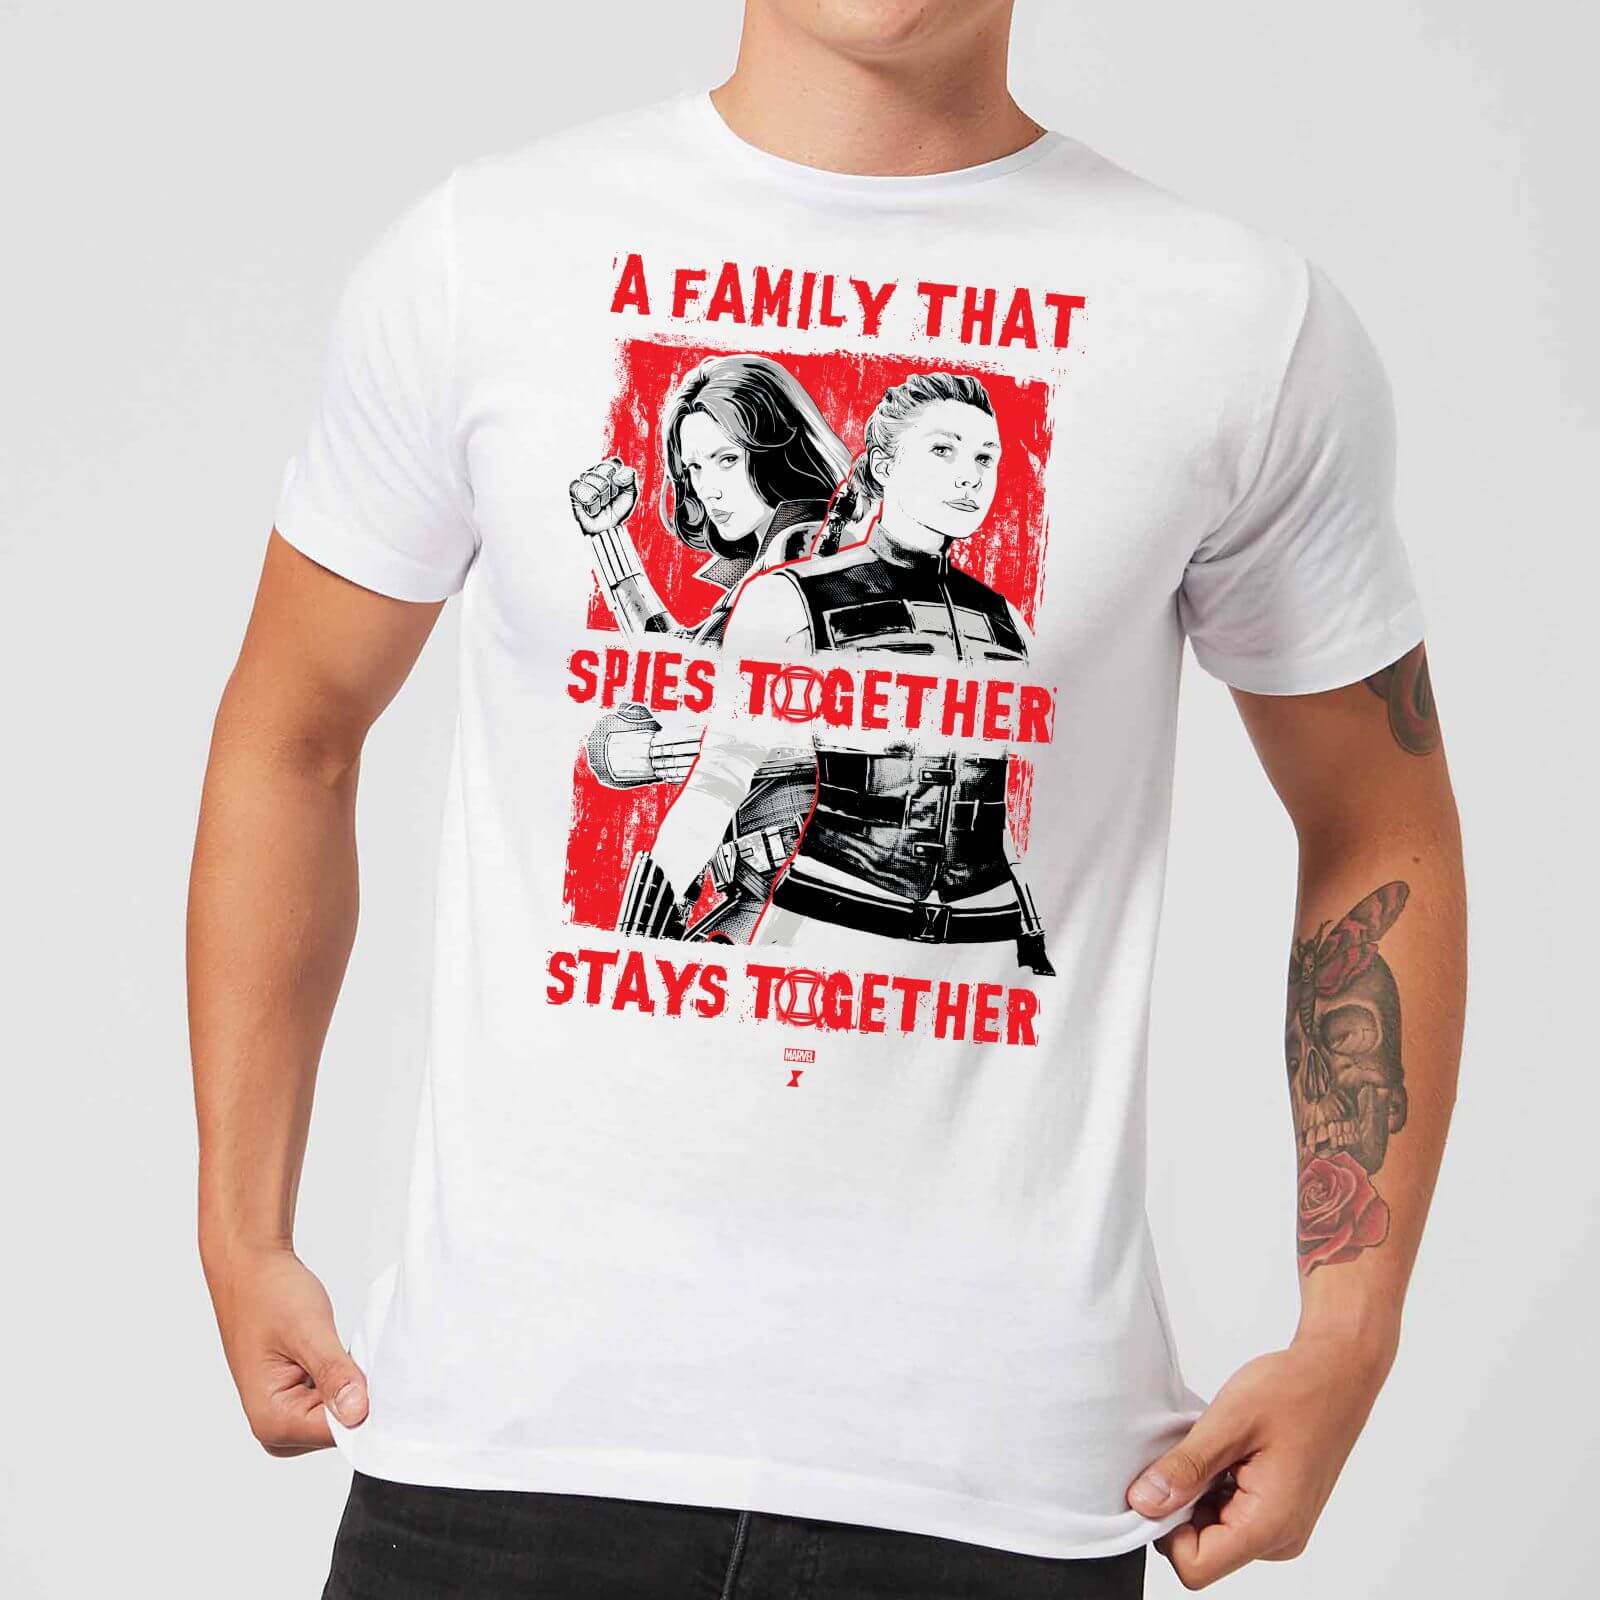 Black Widow Family That Spies Together Men's T-Shirt - White - S - White